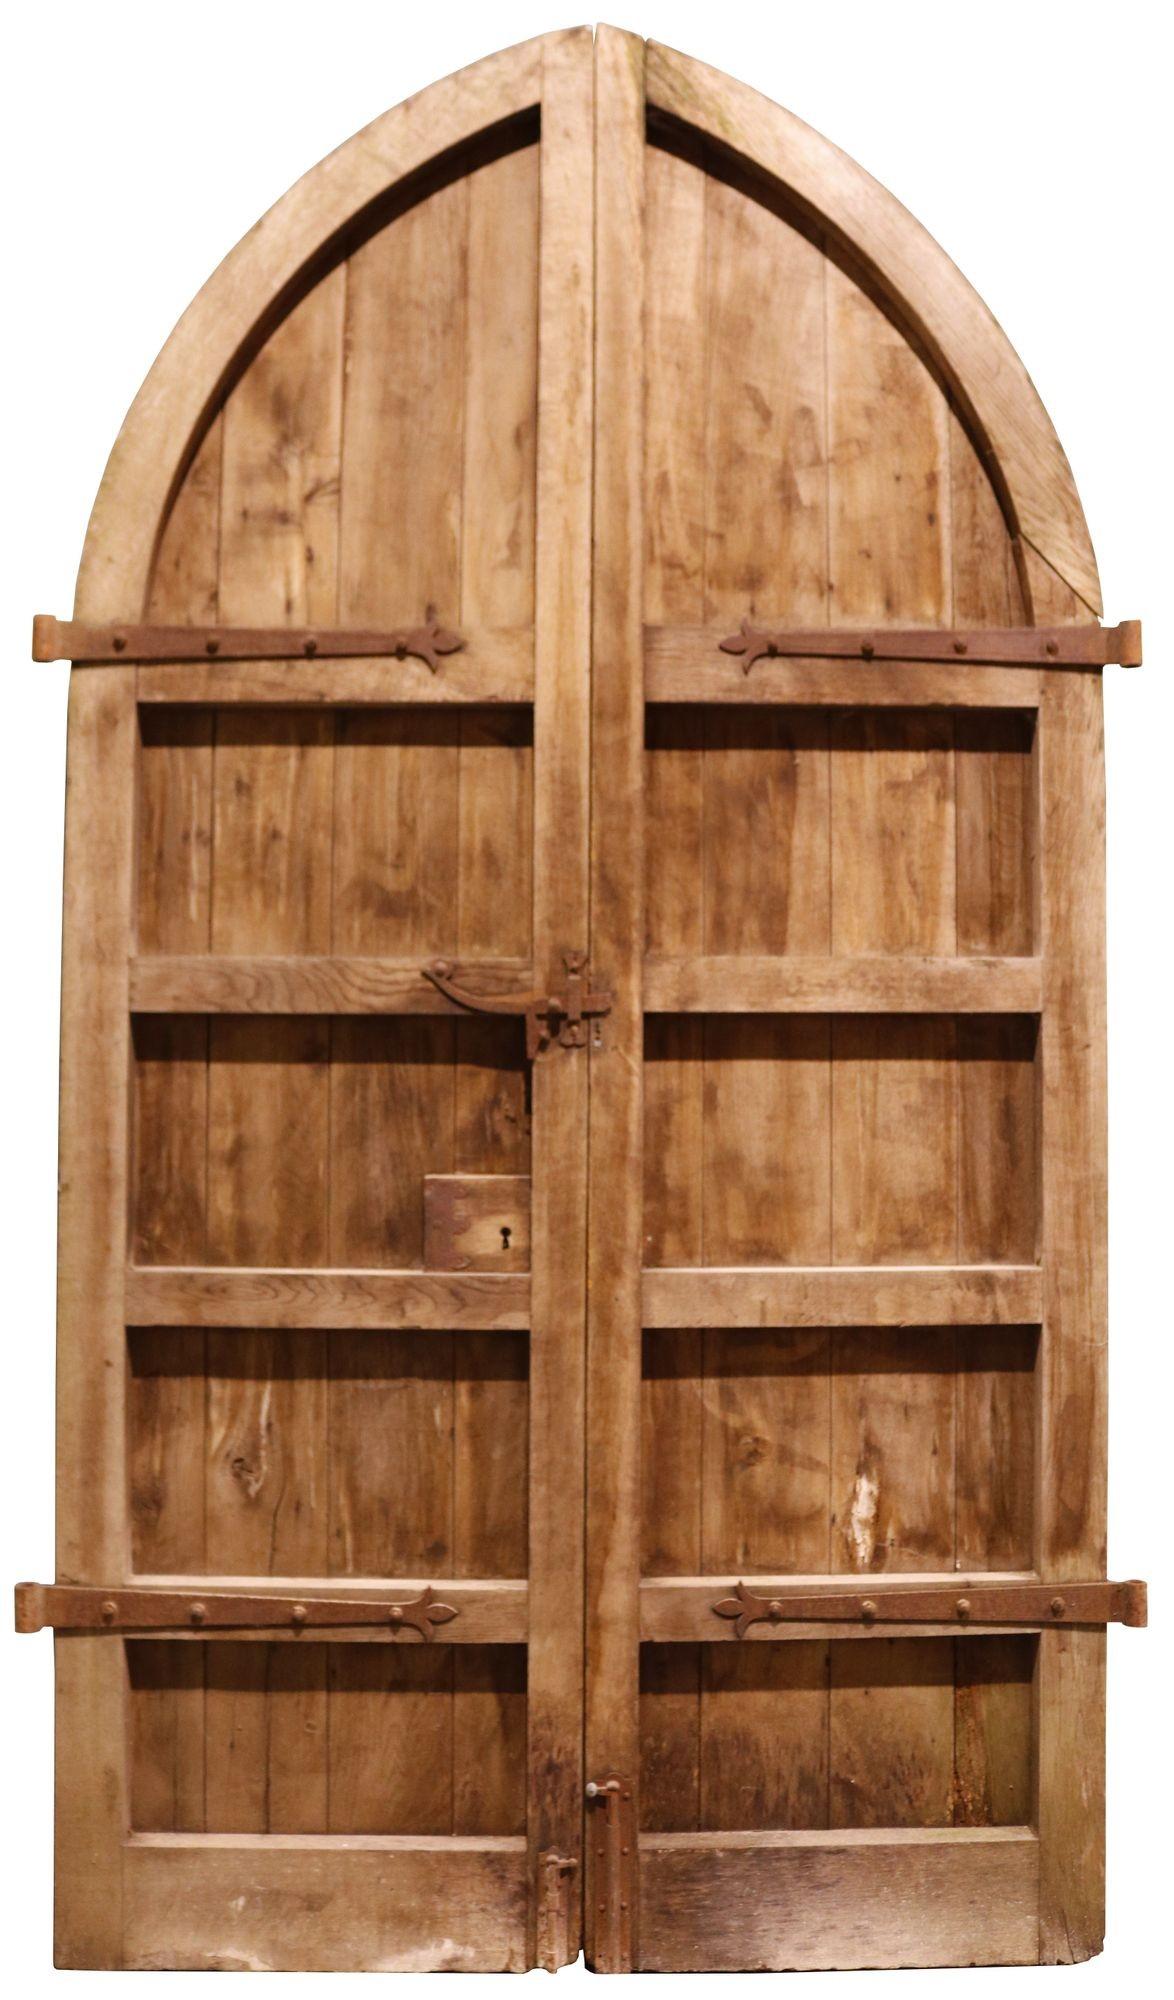 Pair of Antique Gothic Style Church doors. A set of large arched antique doors with original hardware and a weathered time worn appearance. These wonderful oak doors feature fantastic blacksmith made wrought iron hinges and door bolts.